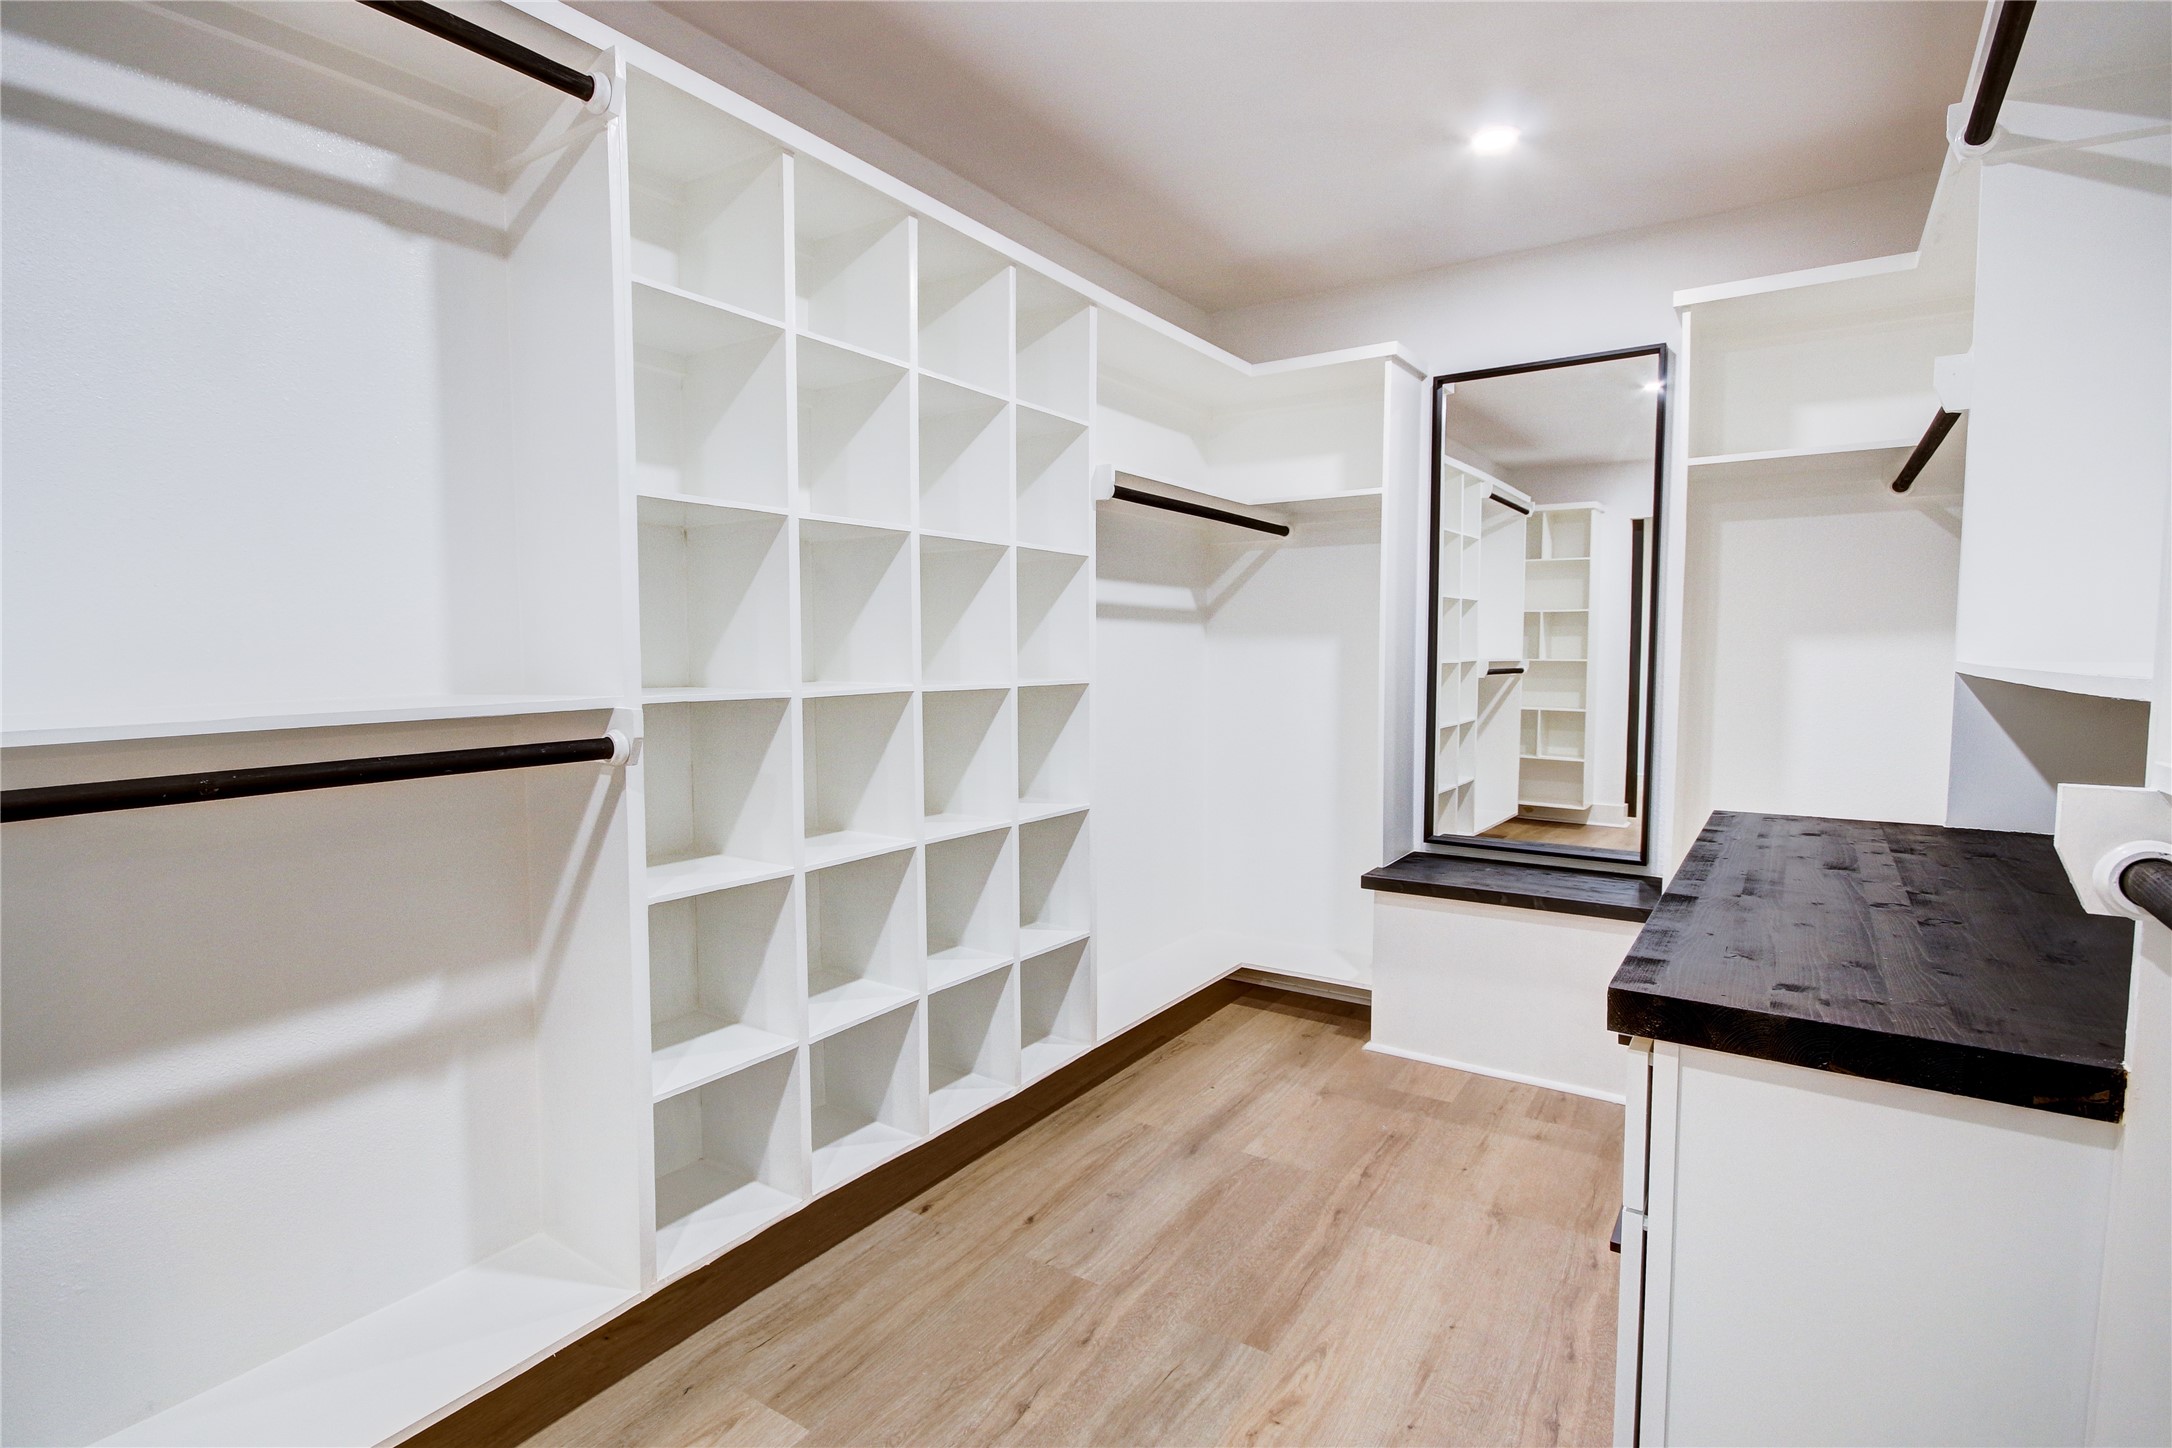 Ample storage and custom built-ins with full body mirror!